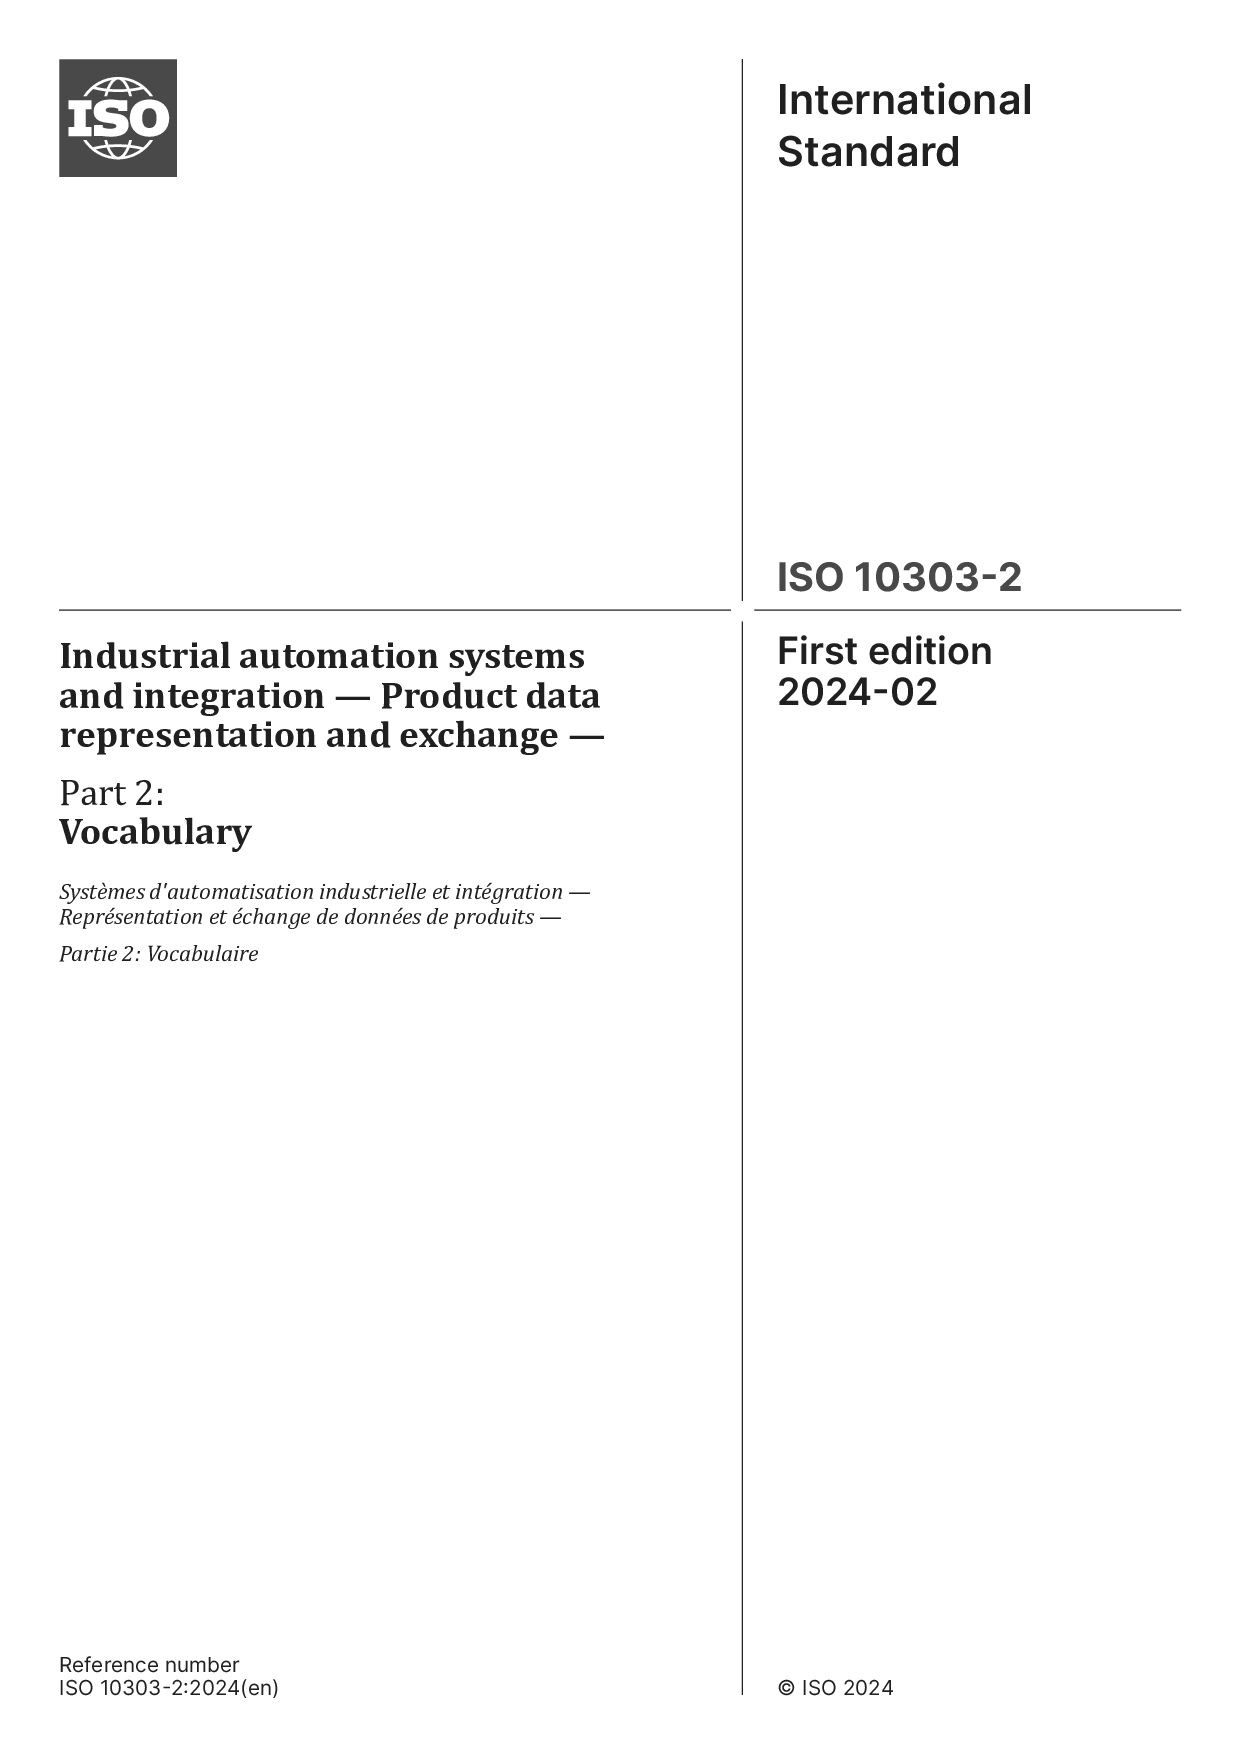 ISO 10303-2:2024